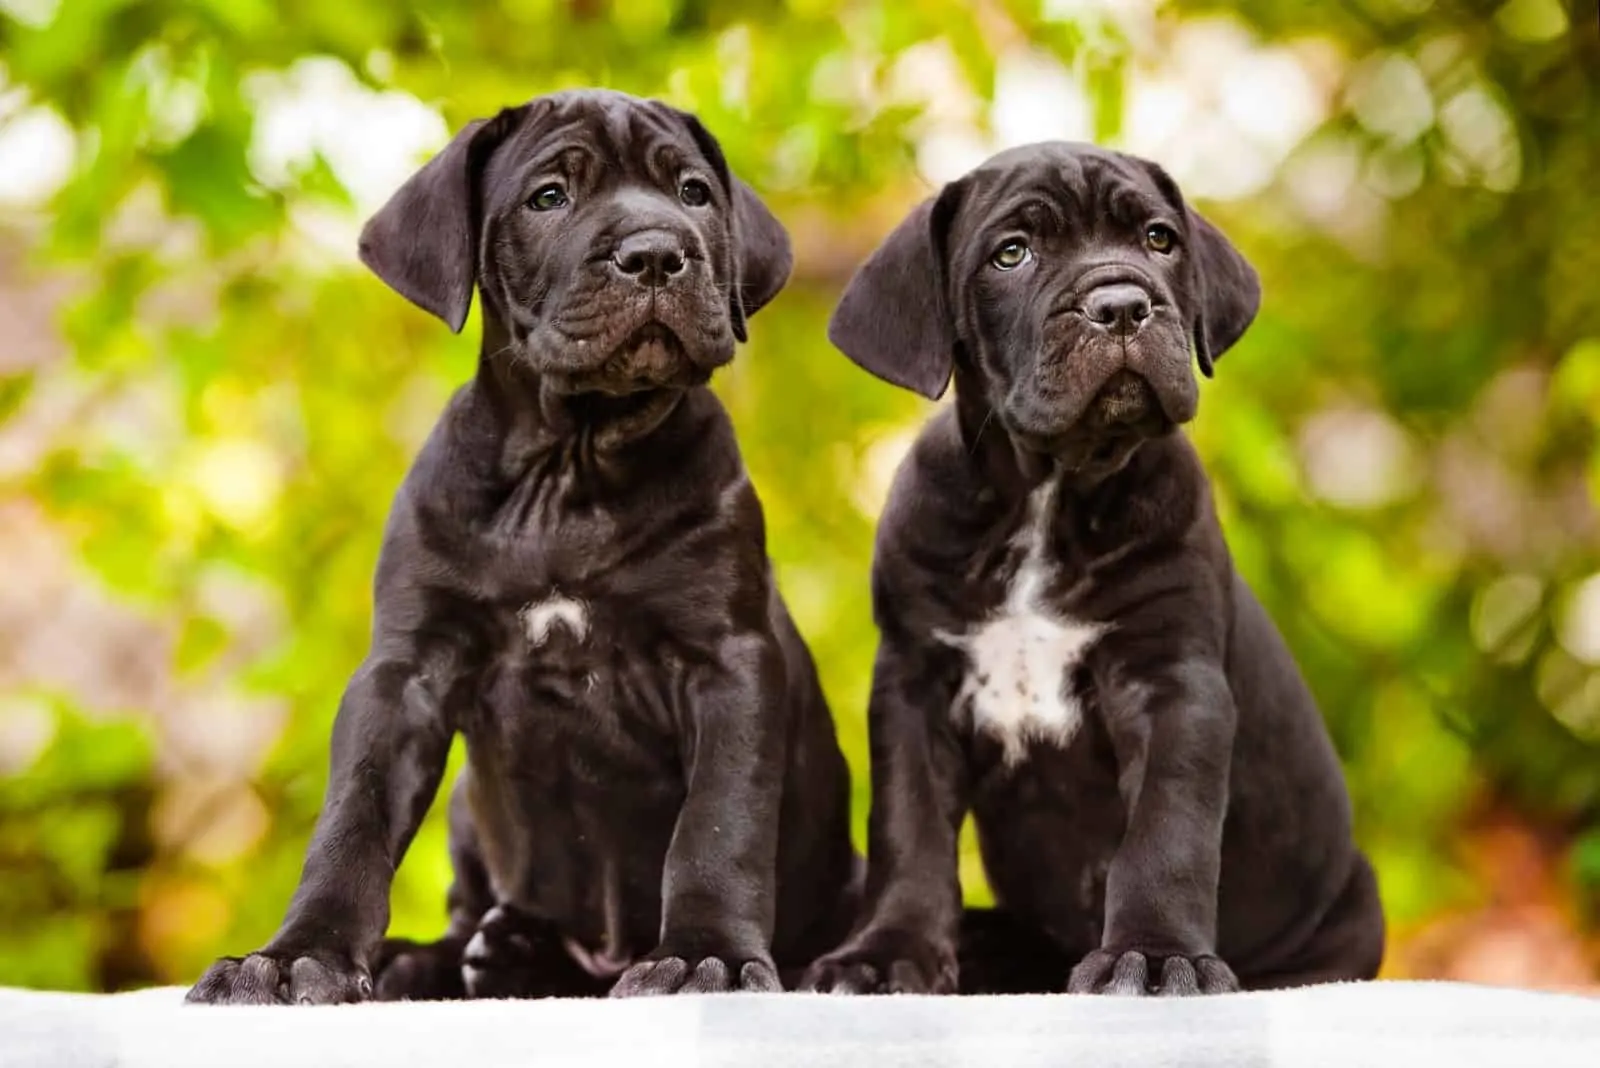 cane corso puppies standing and looking at the same direction